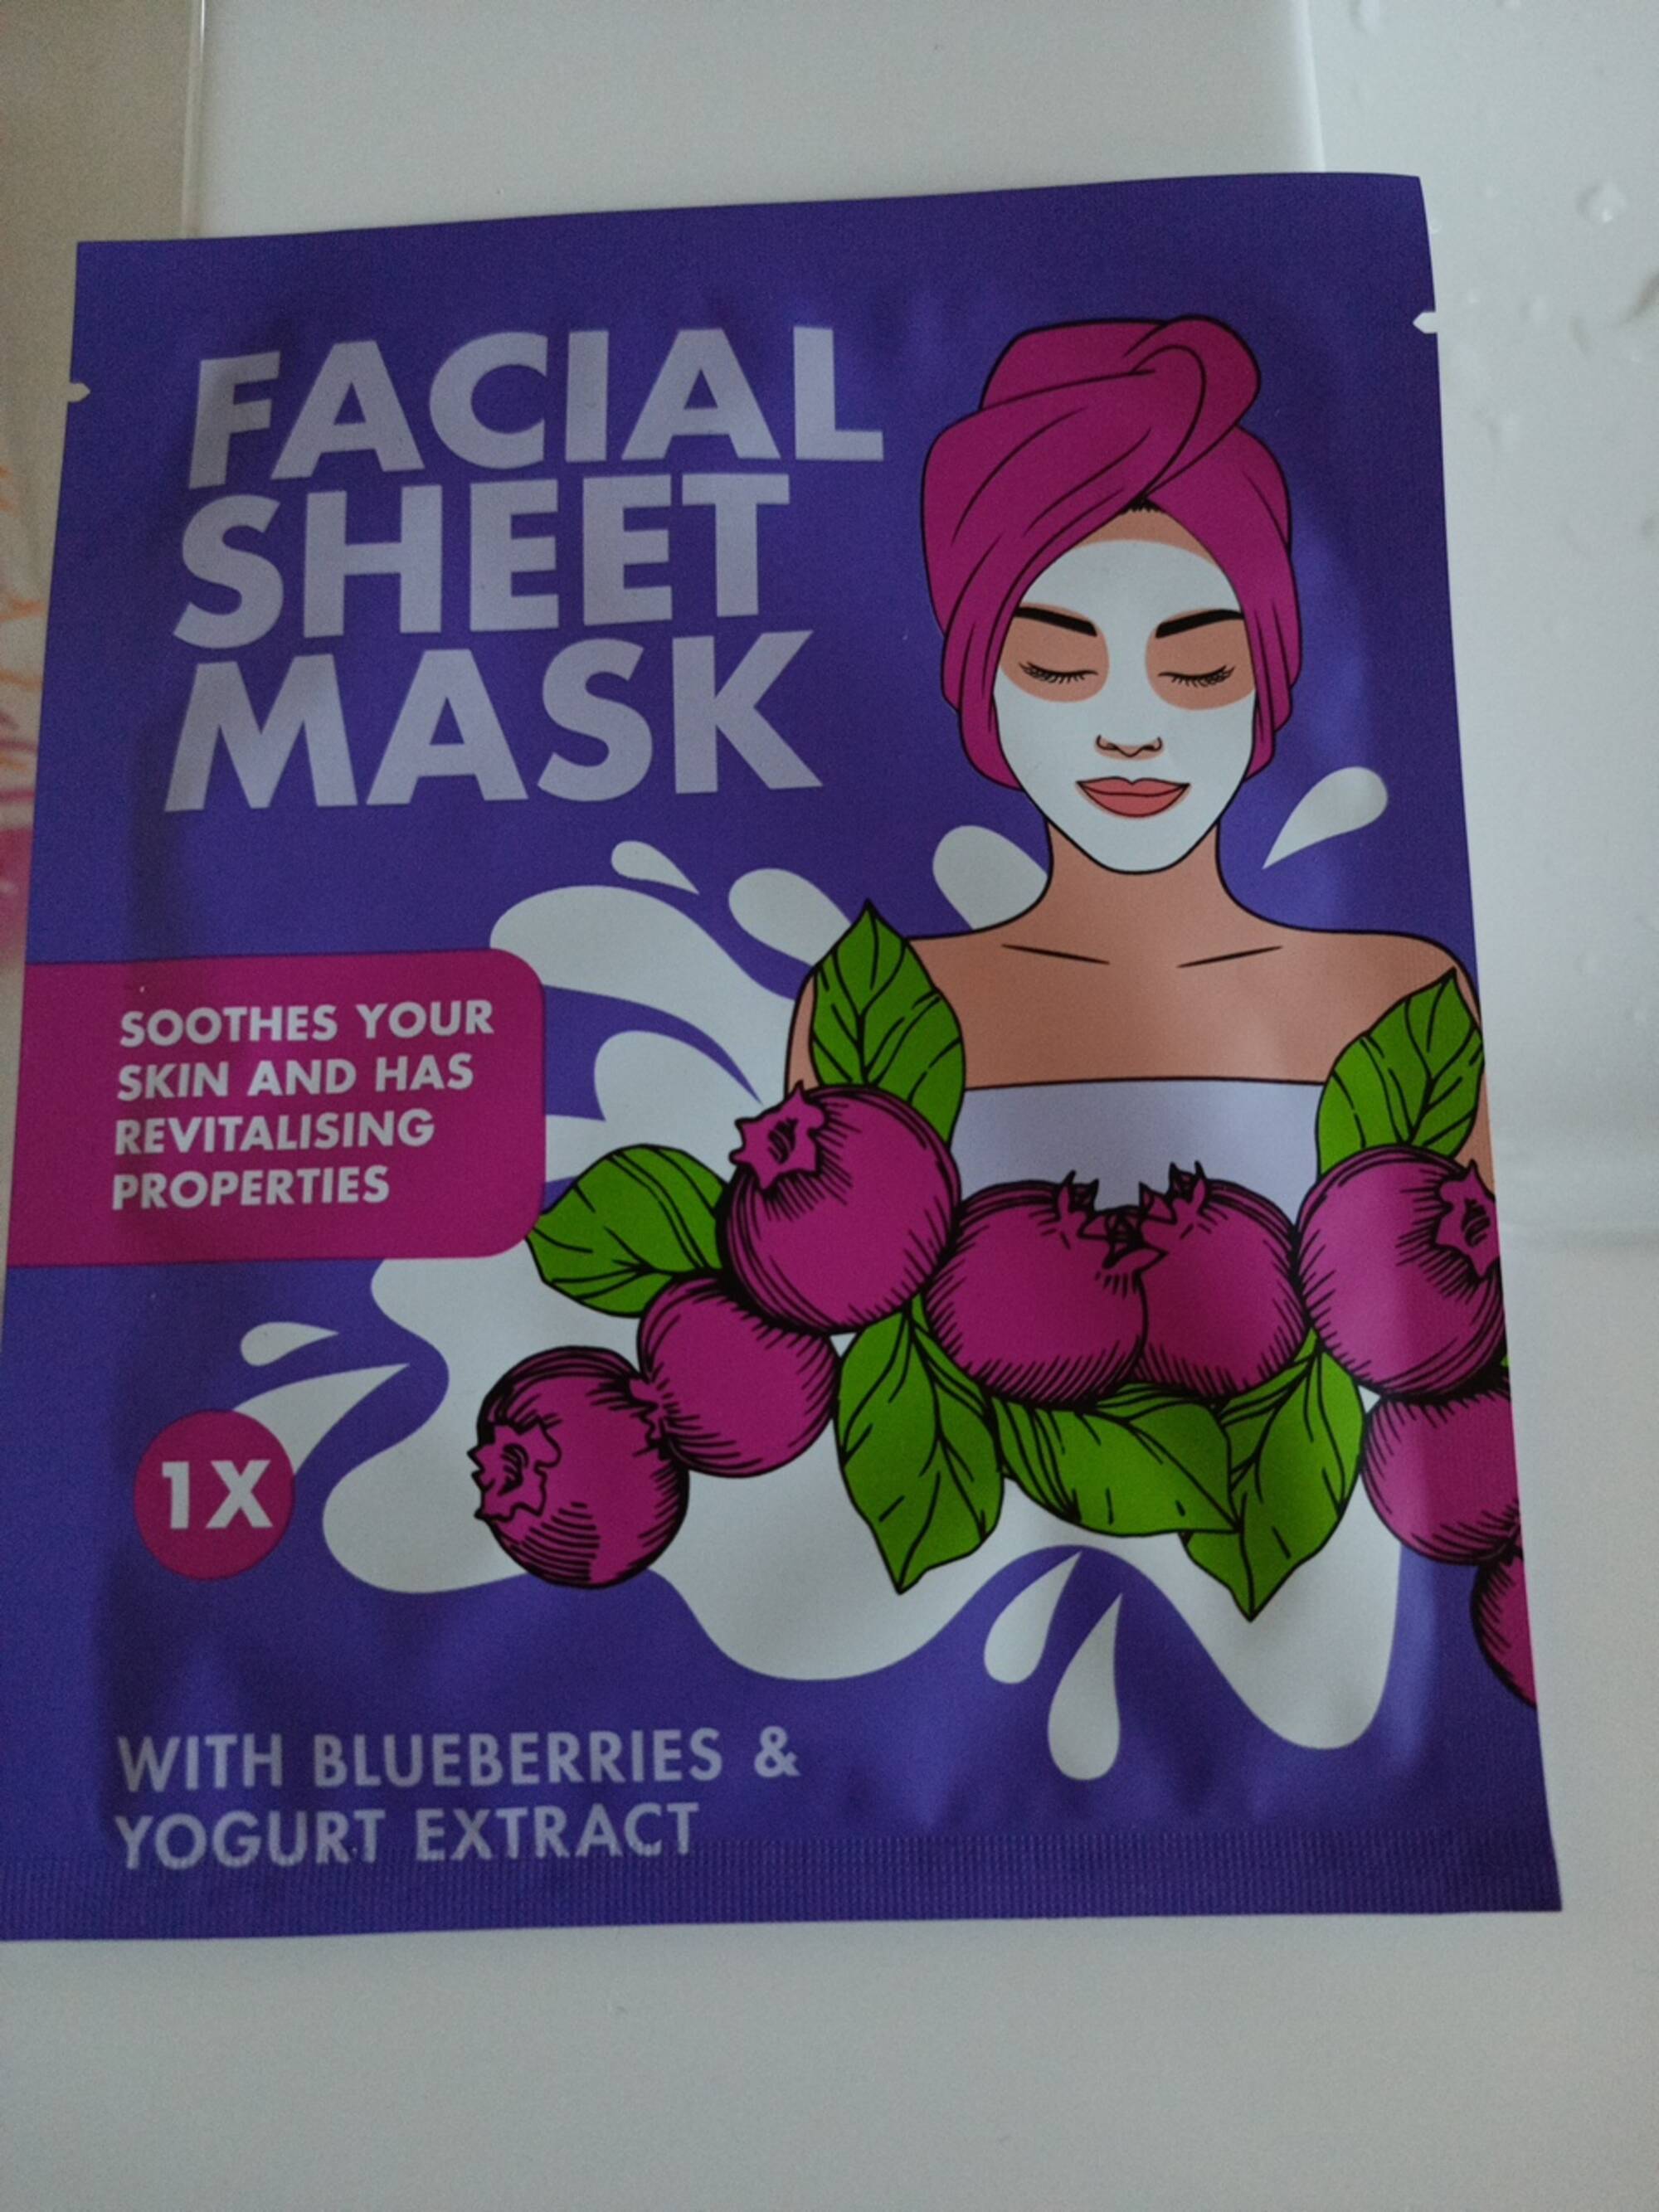 DAYES - Facial sheet mask with blueberries & yogurt extract